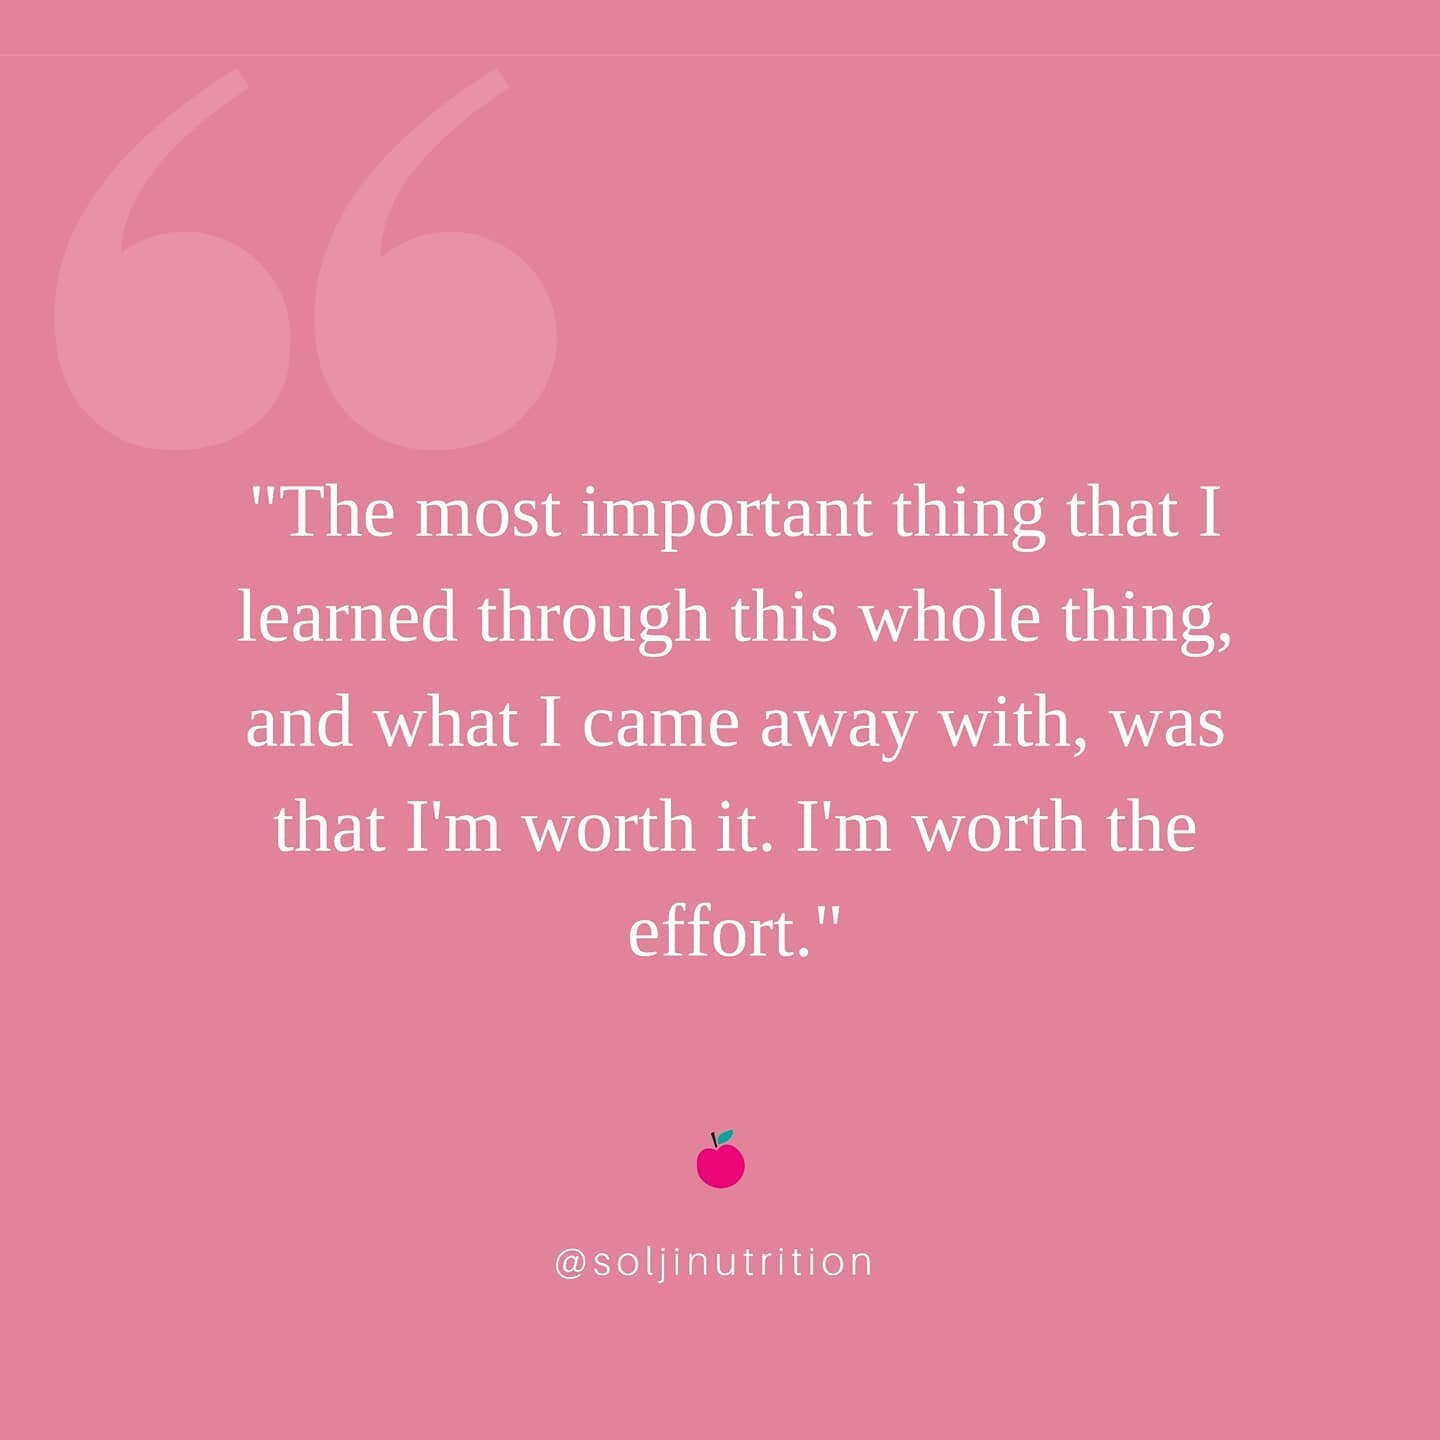 &ldquo;The most important thing that I learned through this whole thing, and what I came away with, was that I&rsquo;m worth it. I&rsquo;m worth the effort.&rdquo;

You are worth the effort.

♡ No matter how many times you&rsquo;ve tried and failed, 